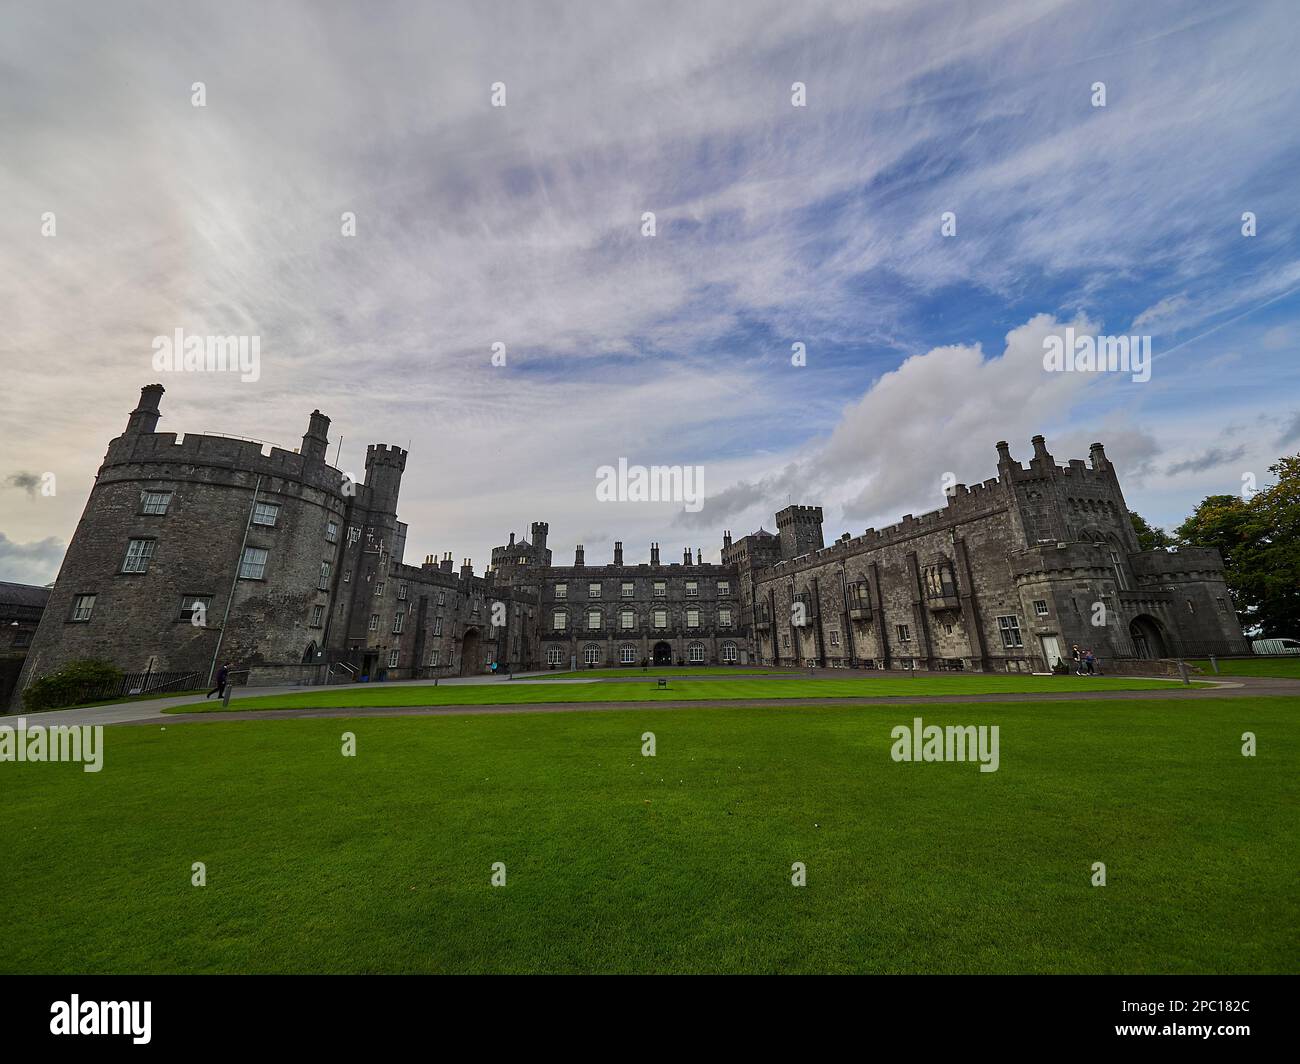 Kilkenny, Ireland - 09 23 2015: Kilkenny castle, an typical and old castle from medival times. Stock Photo